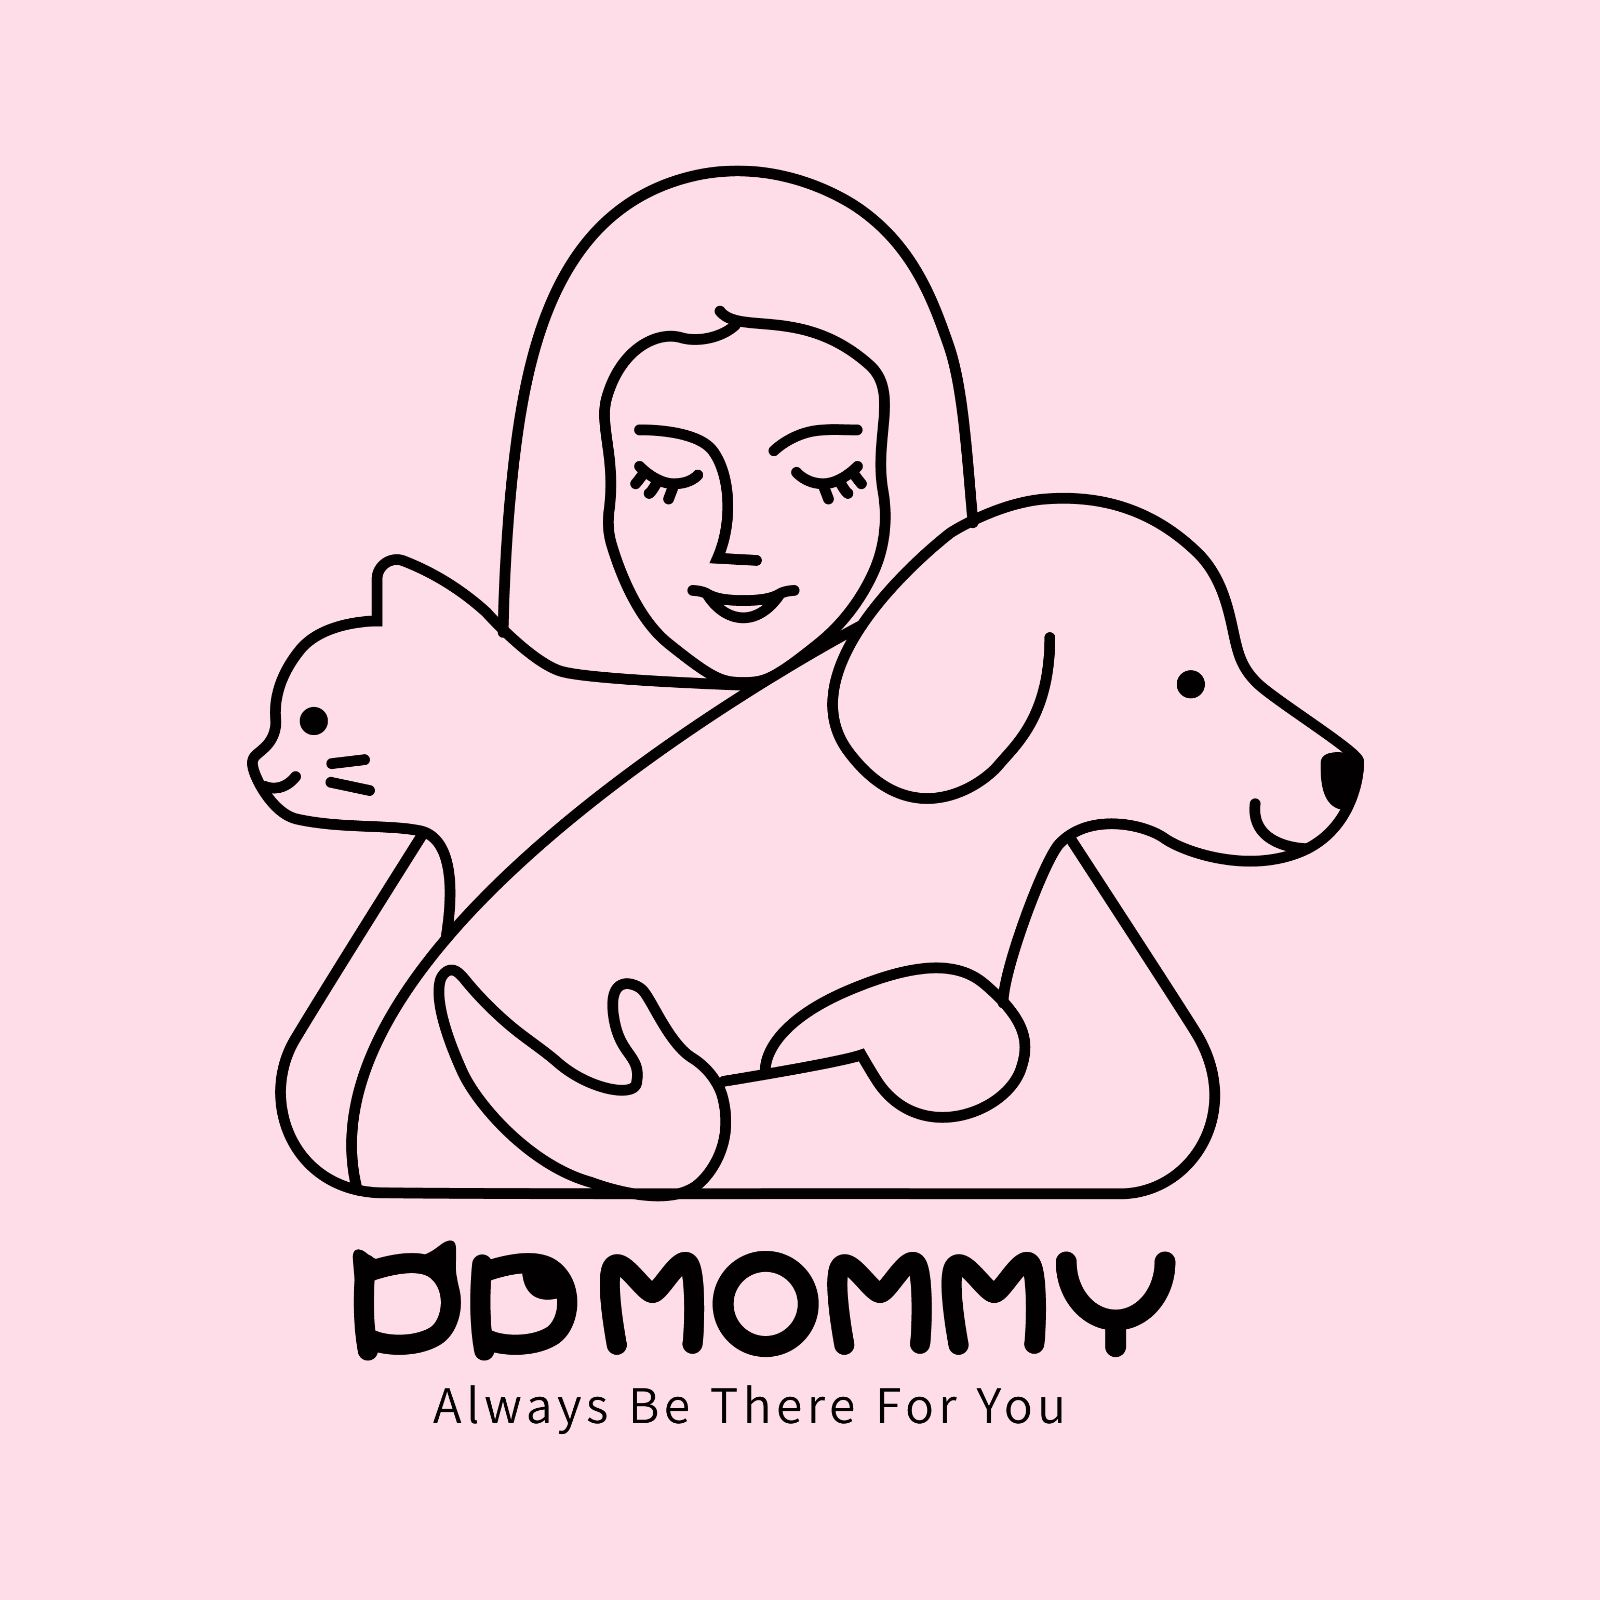 DDMOMMY